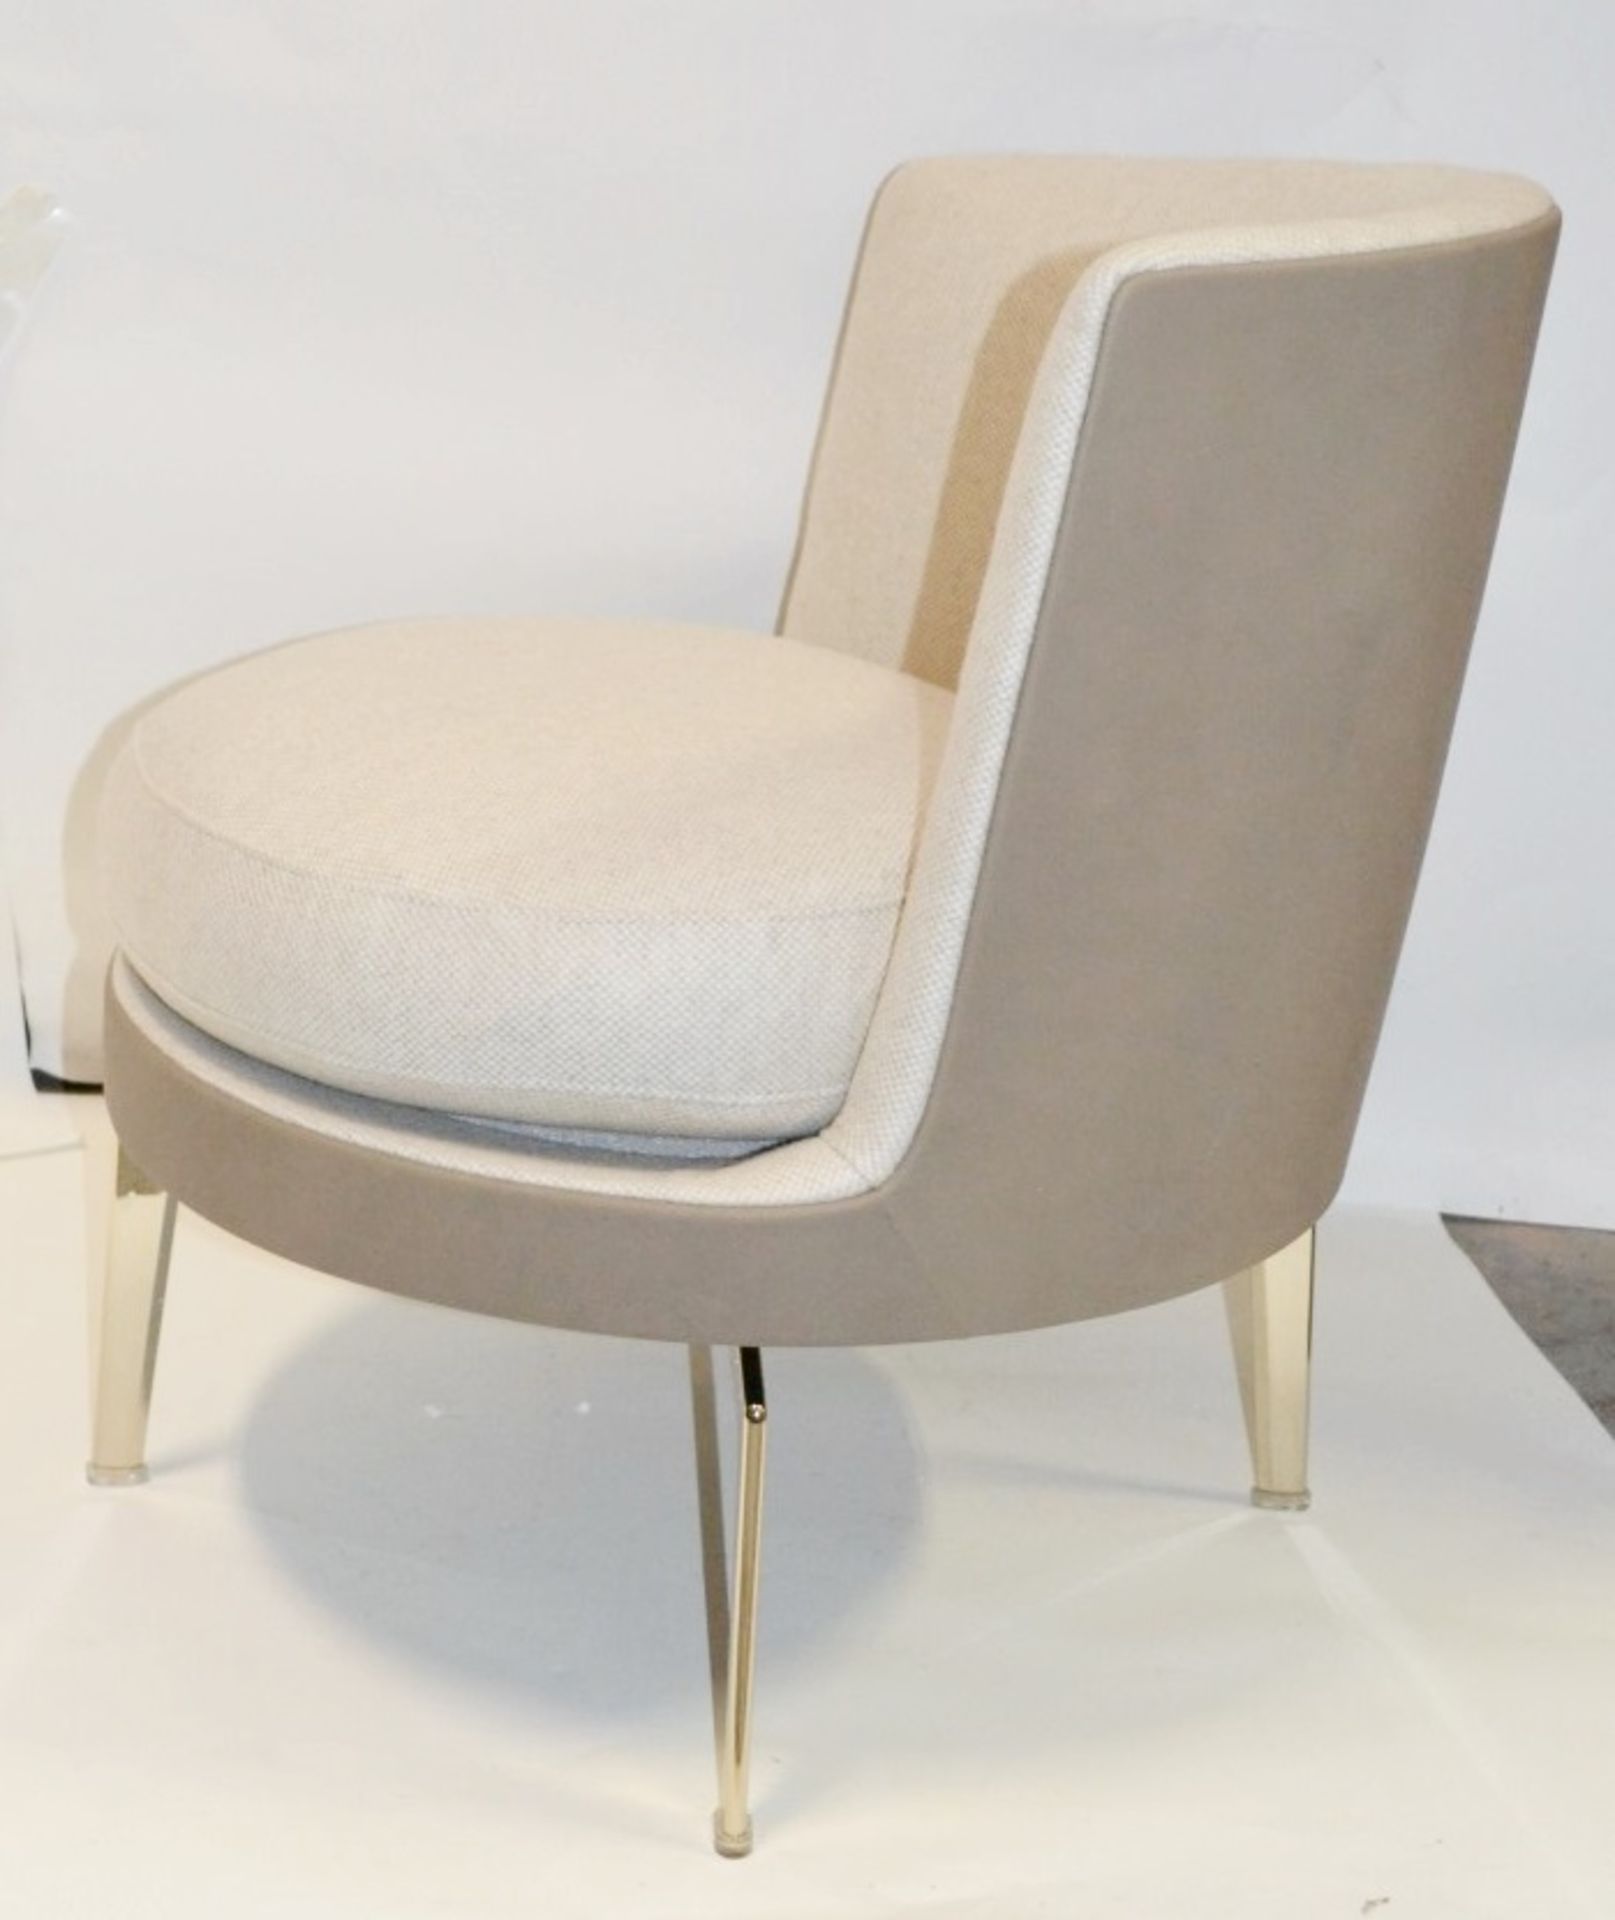 1 x Flexform "FEELGOOD" Soft Armchair - Features Fabric / Leather Upholstery, and Swivel Base - Ref: - Image 4 of 10